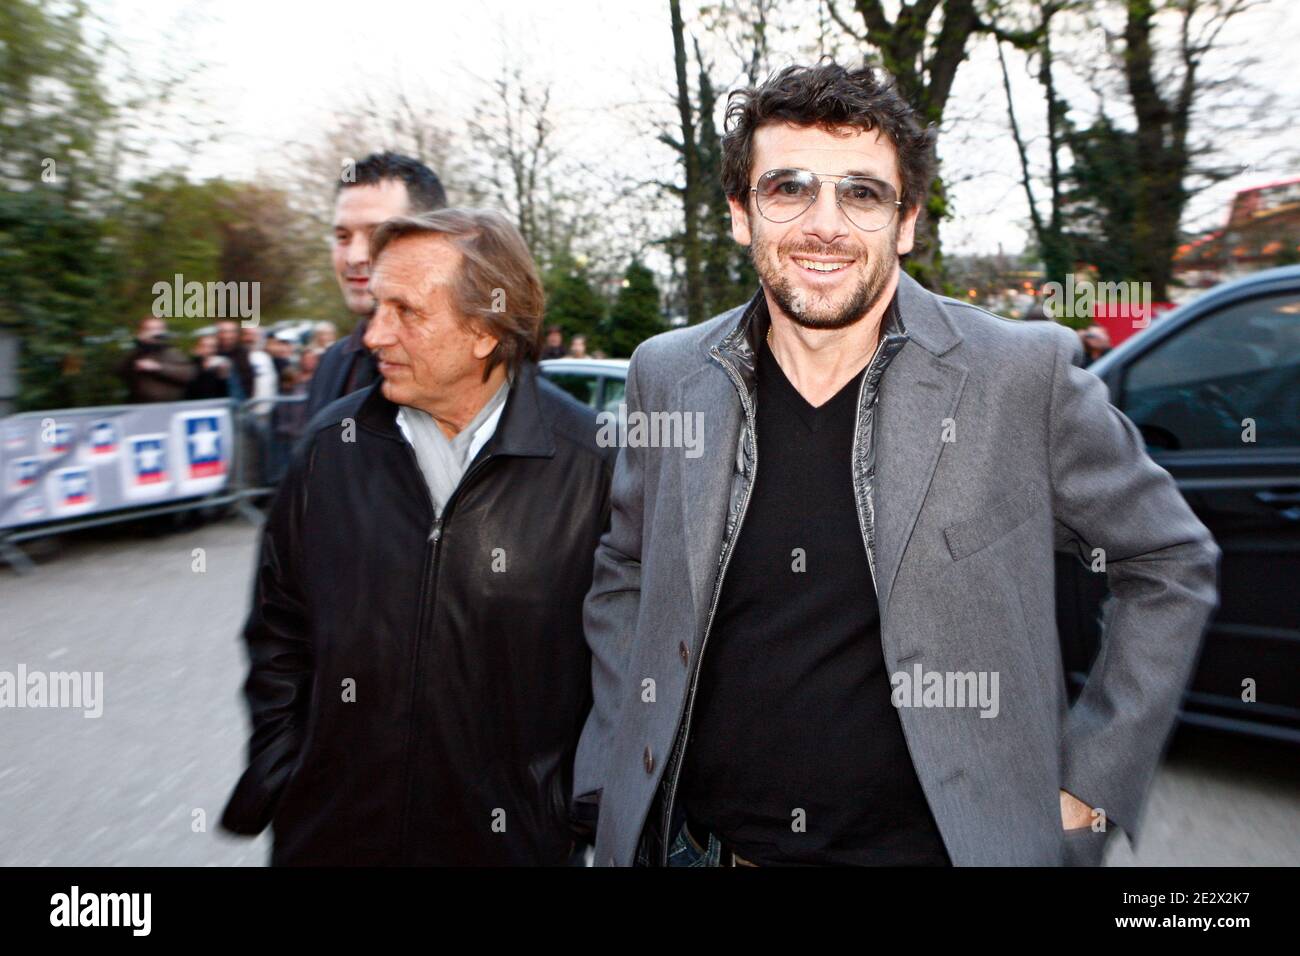 French singer and actor Patrick Bruel and director Alexandre Arcady arrive at the premiere of his last film 'Comme les 5 doigts de la main' in Kinepolis cinema in Lomme, north of France, on April 12, 2010. Photo by Mikael LIbert/ABACAPRESS.COM Stock Photo